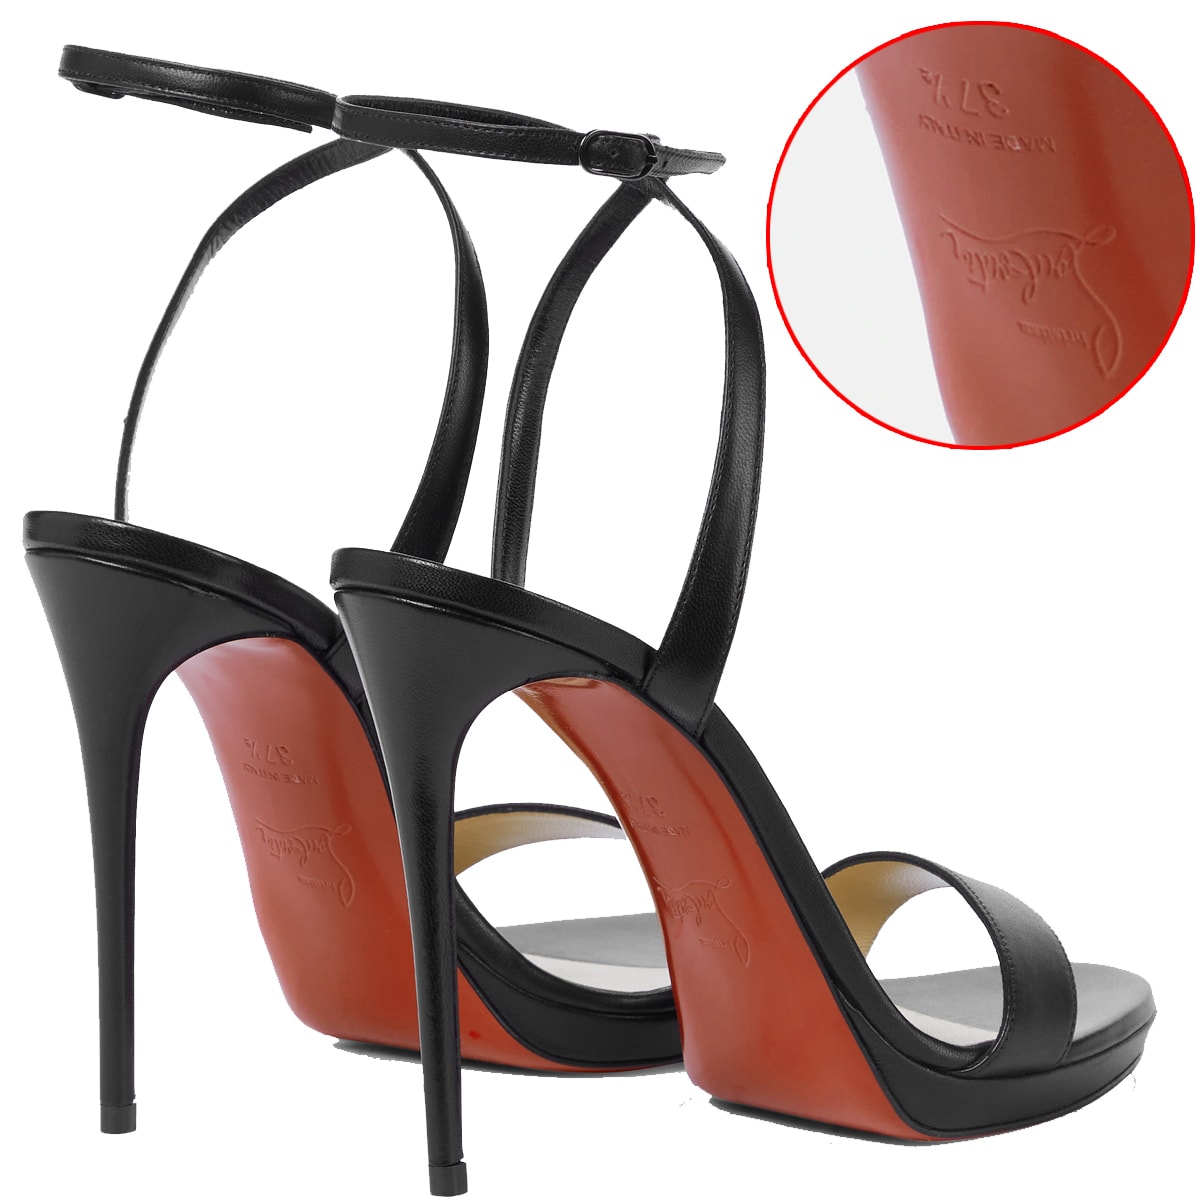 Genuine Christian Louboutin shoes have smooth and sturdy red leather soles